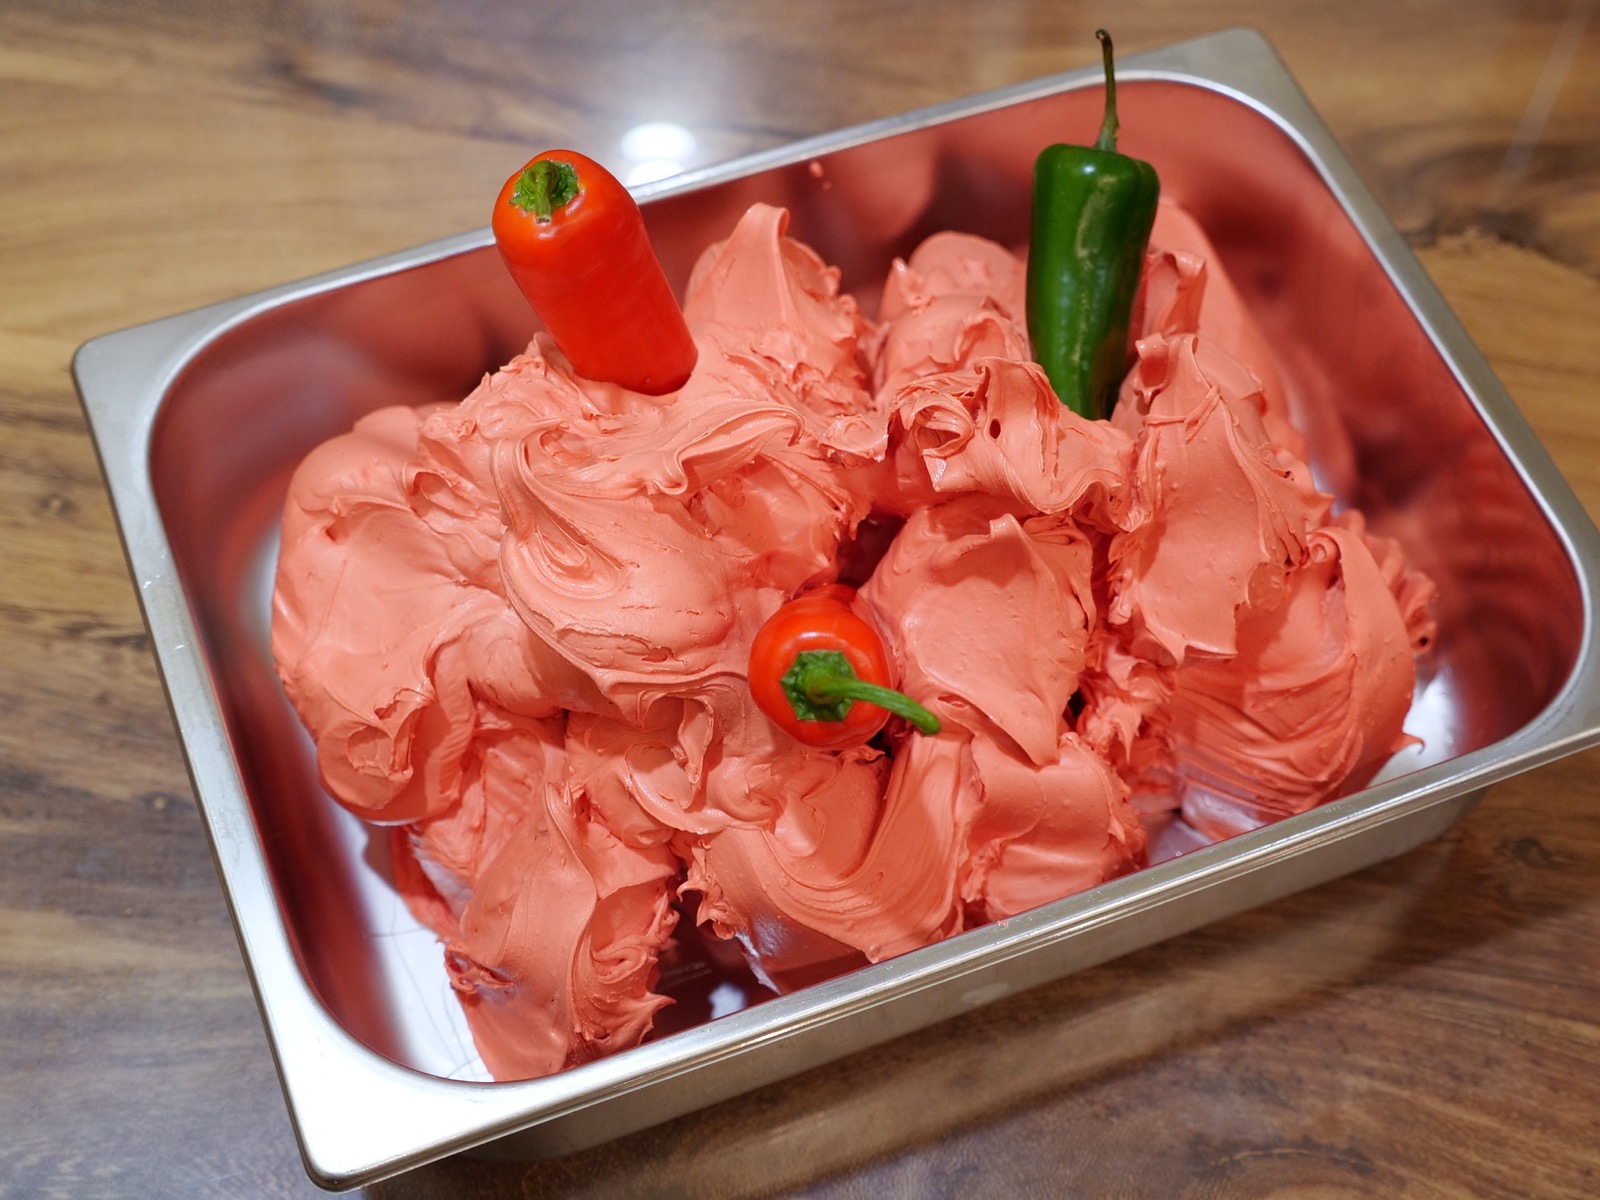 🍦 It’s Time to Vote “Yay” Or “Nay” On These Unusual Ice Cream Flavors Ghost Pepper Ice Cream